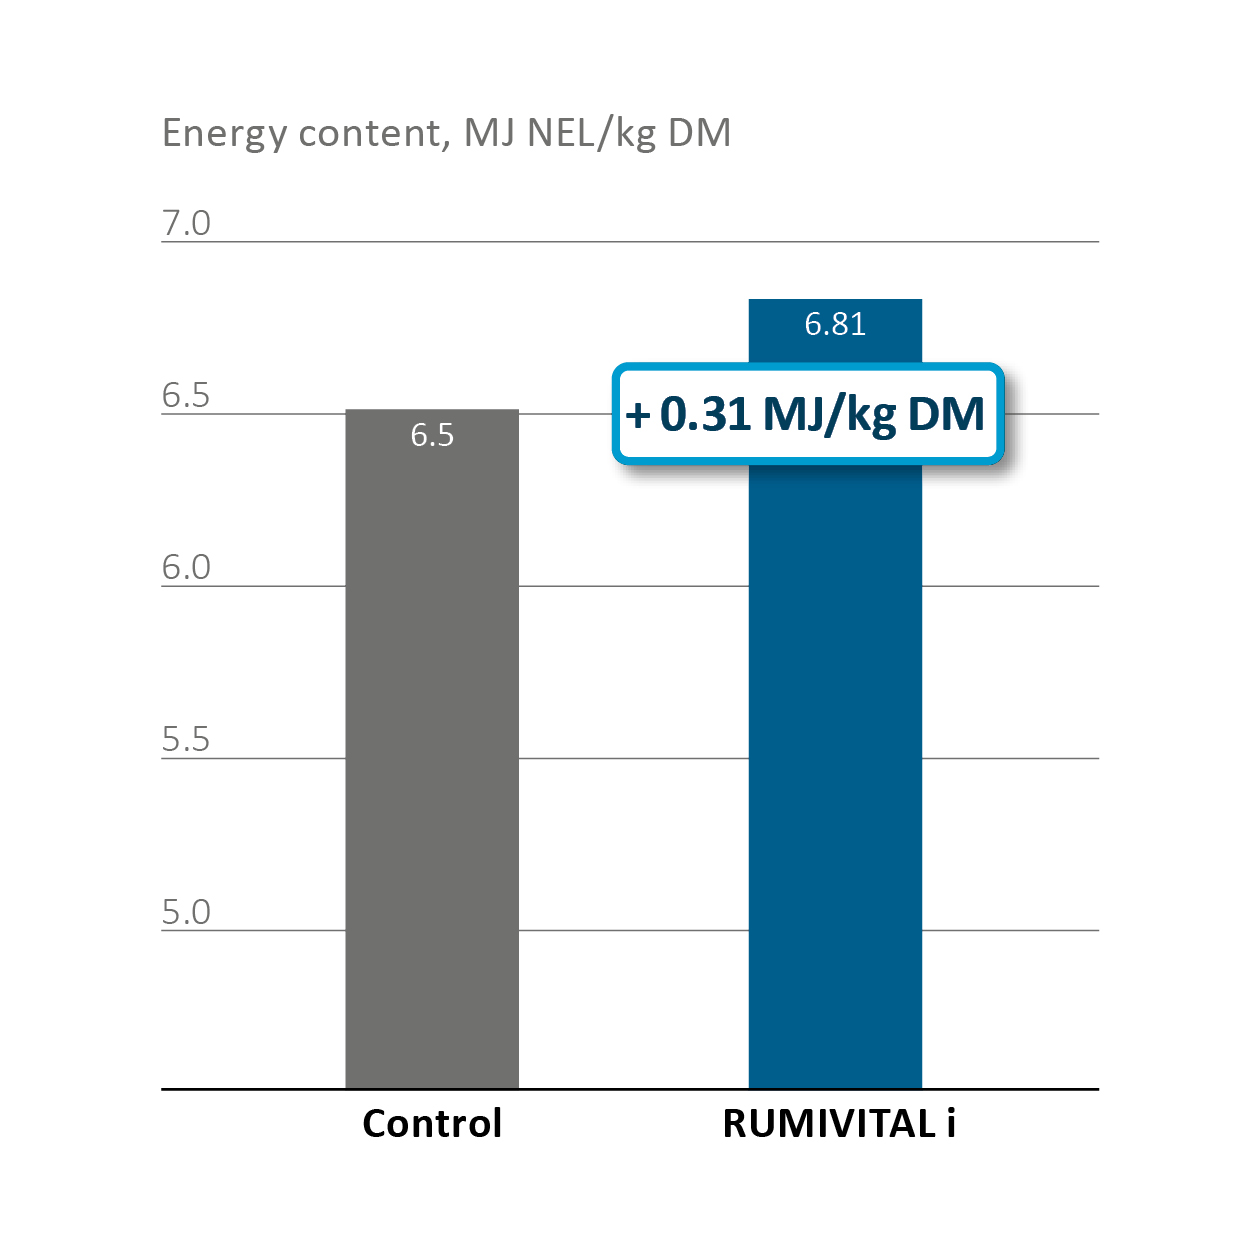  RUMIVITAL®i increases energy content